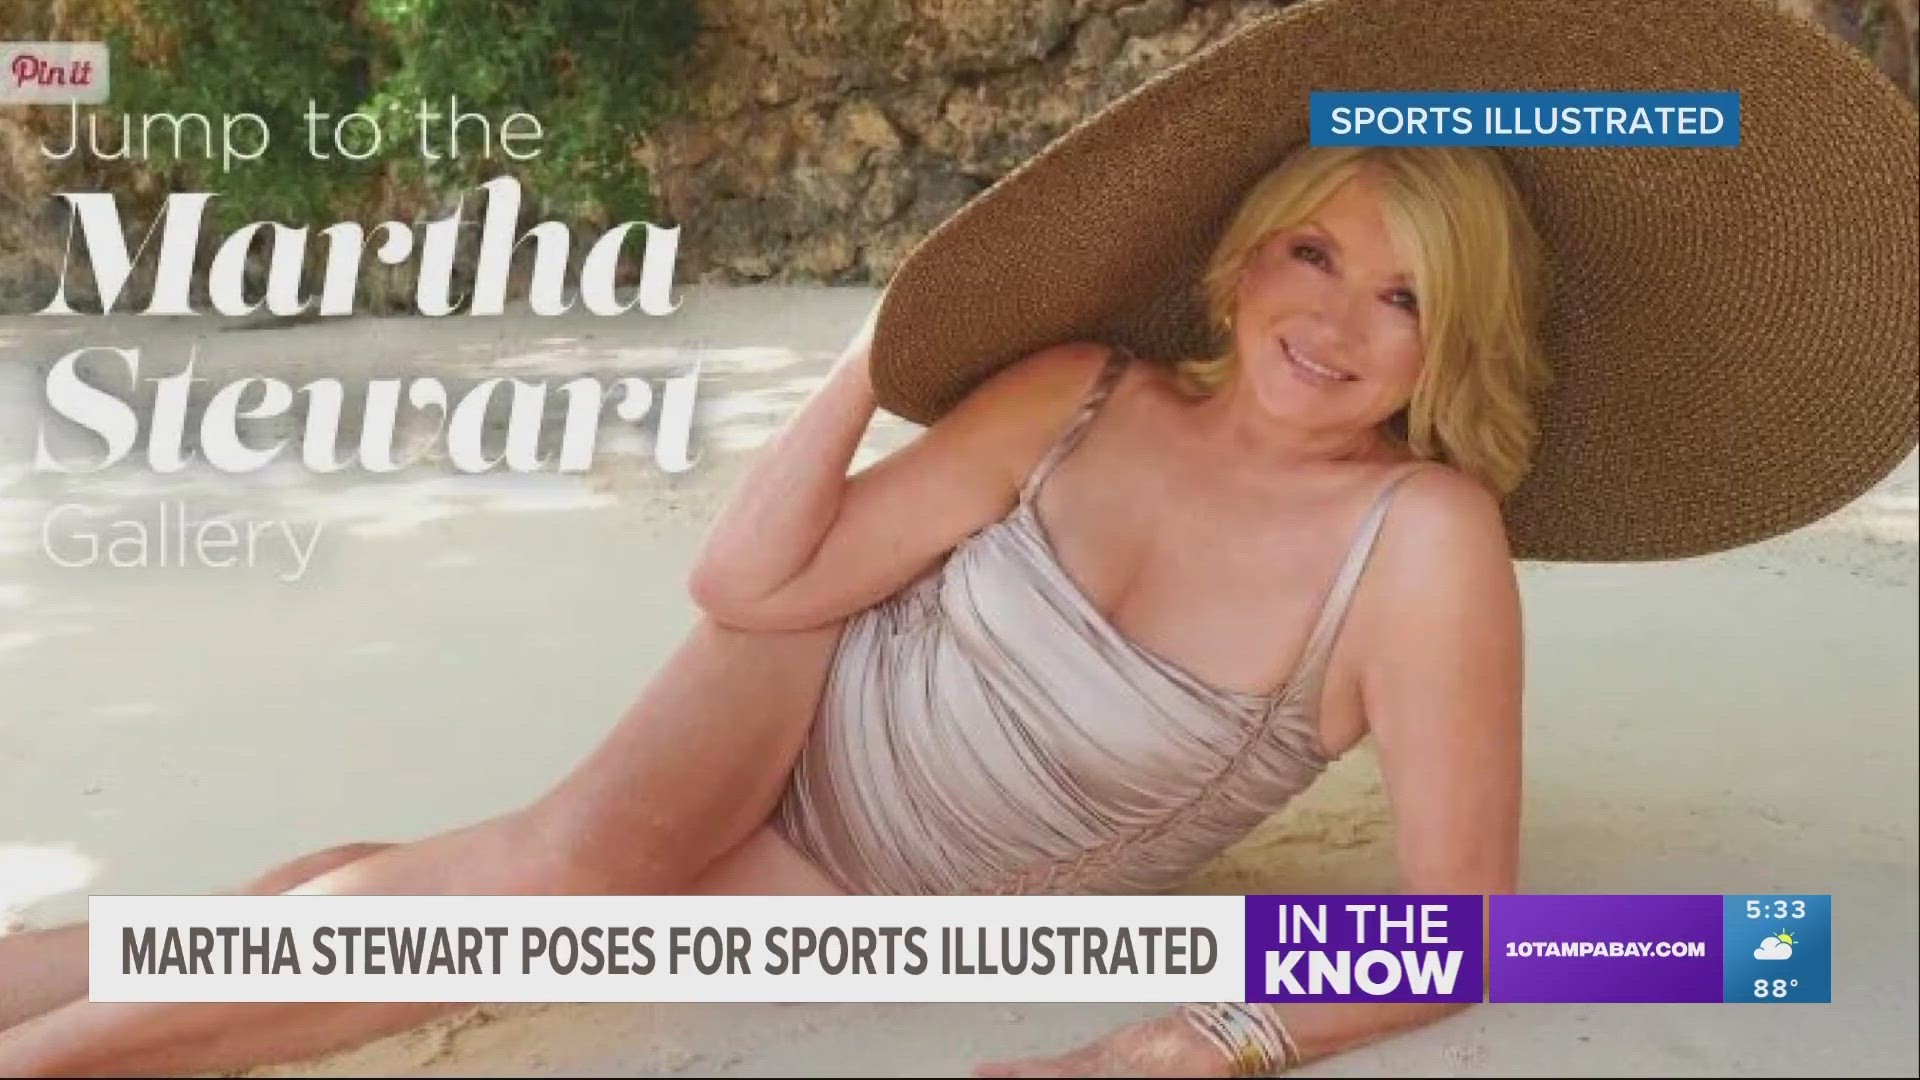 Martha Stewart told Sports Illustrated she was motivated to participate in the swimsuit edition to show that women can look good and feel great at any age.